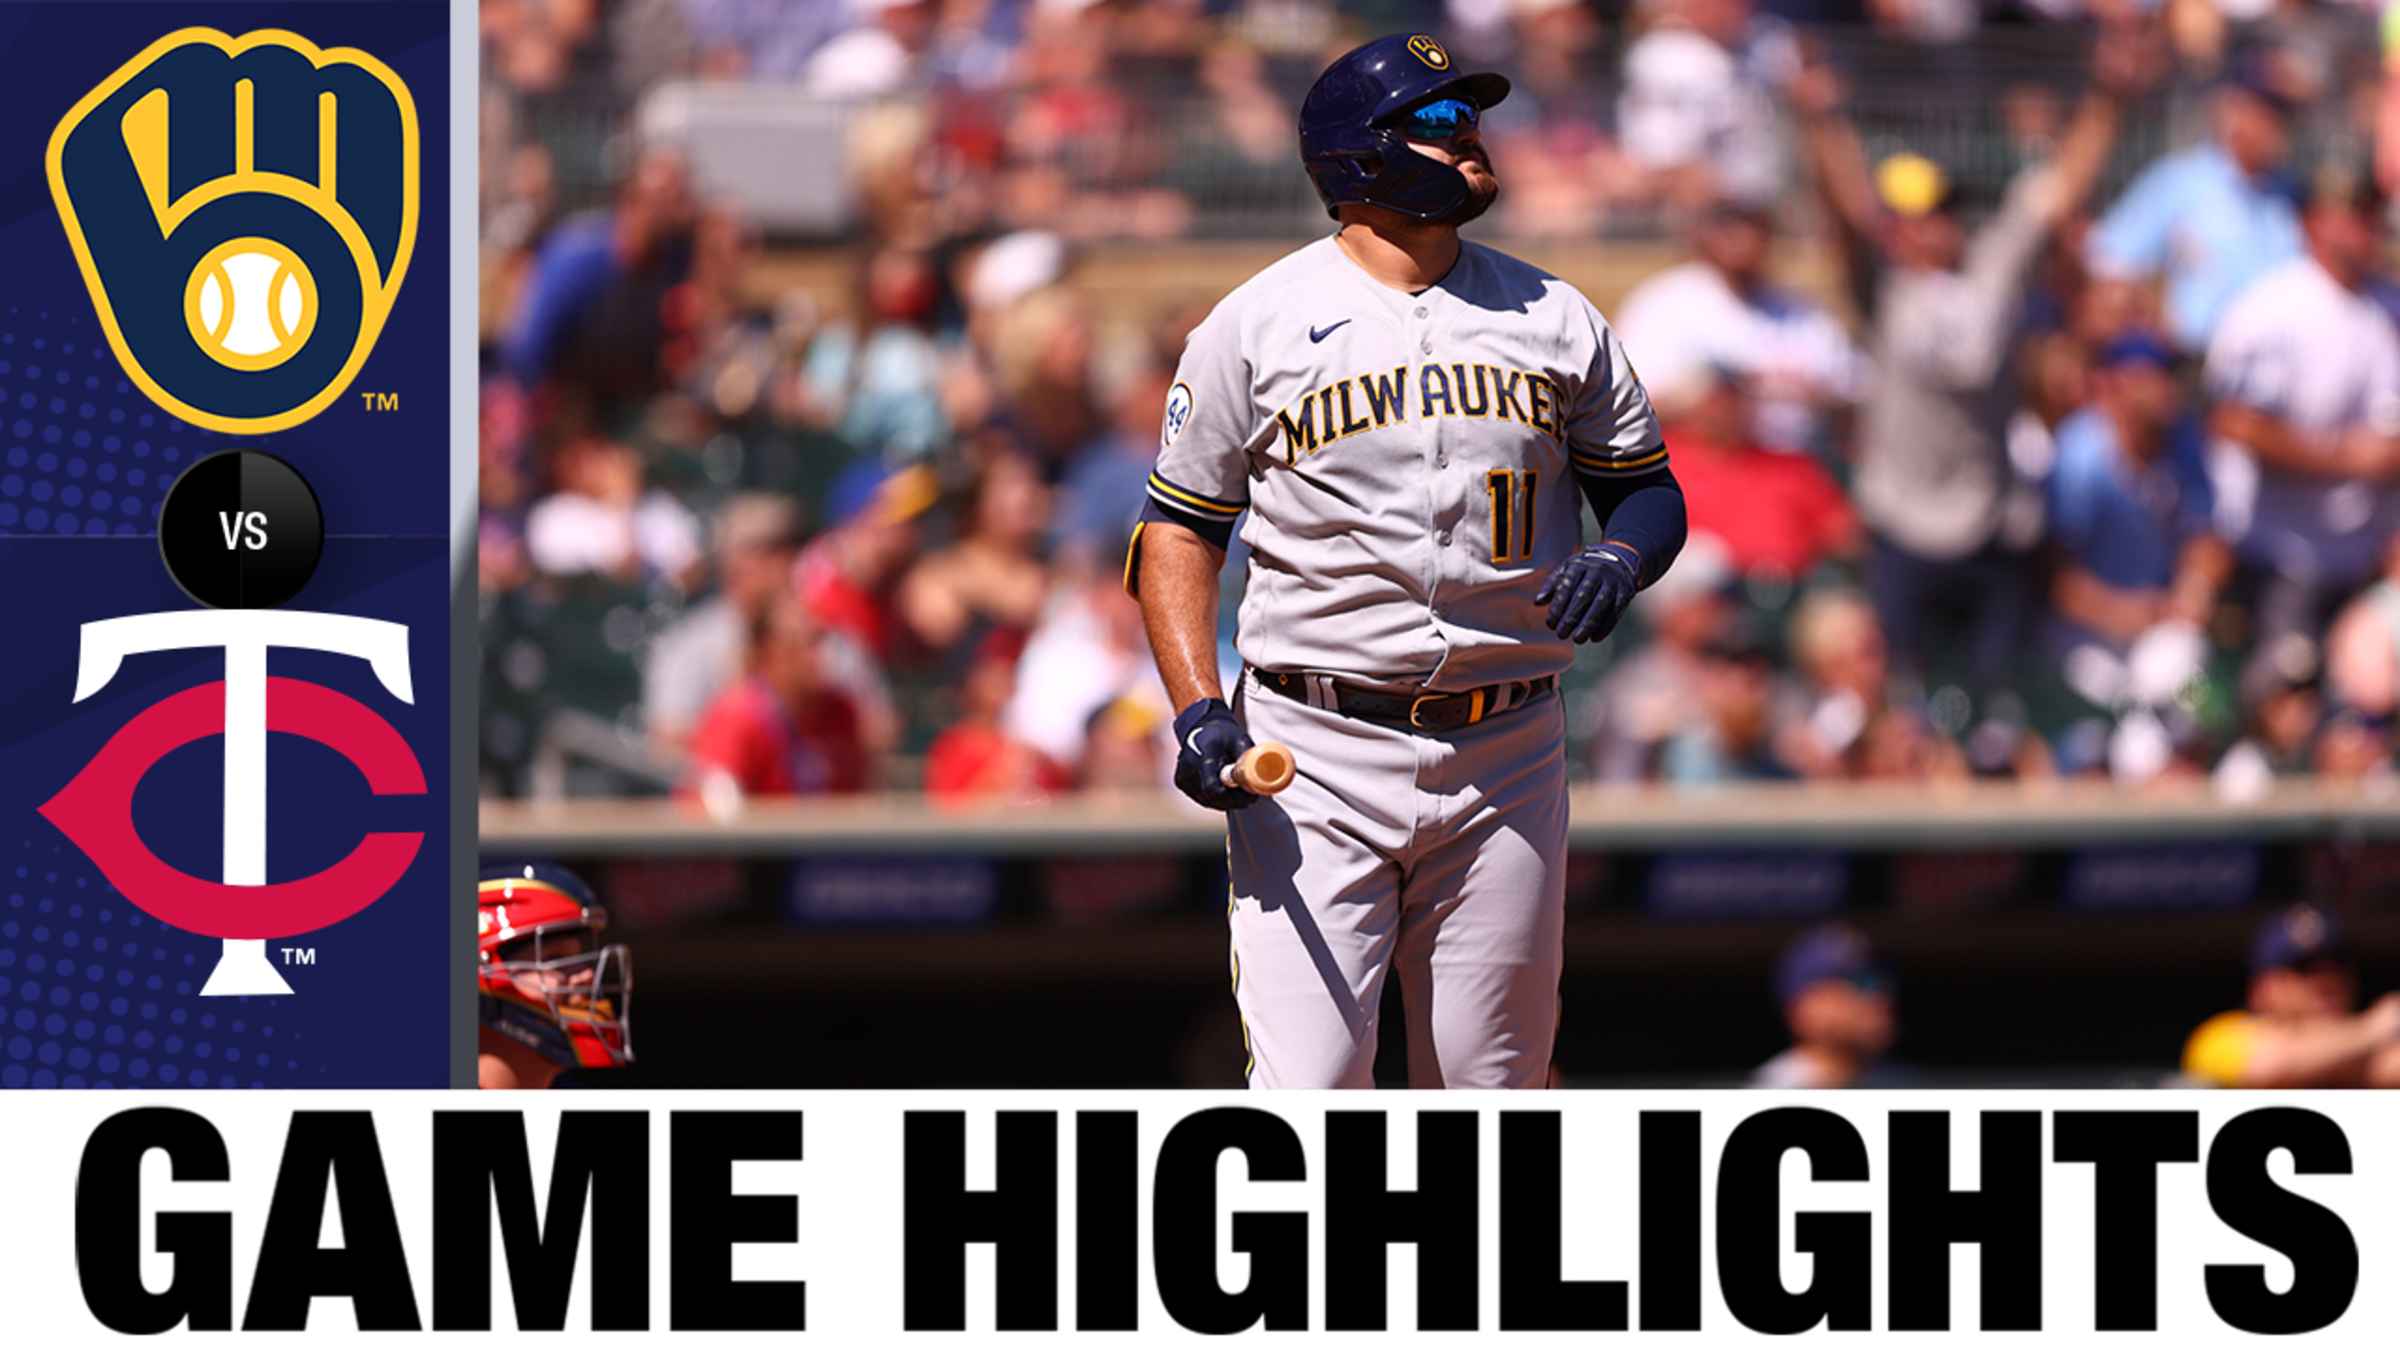 Images from the Brewers' 8-2 loss to the Twins on Sunday